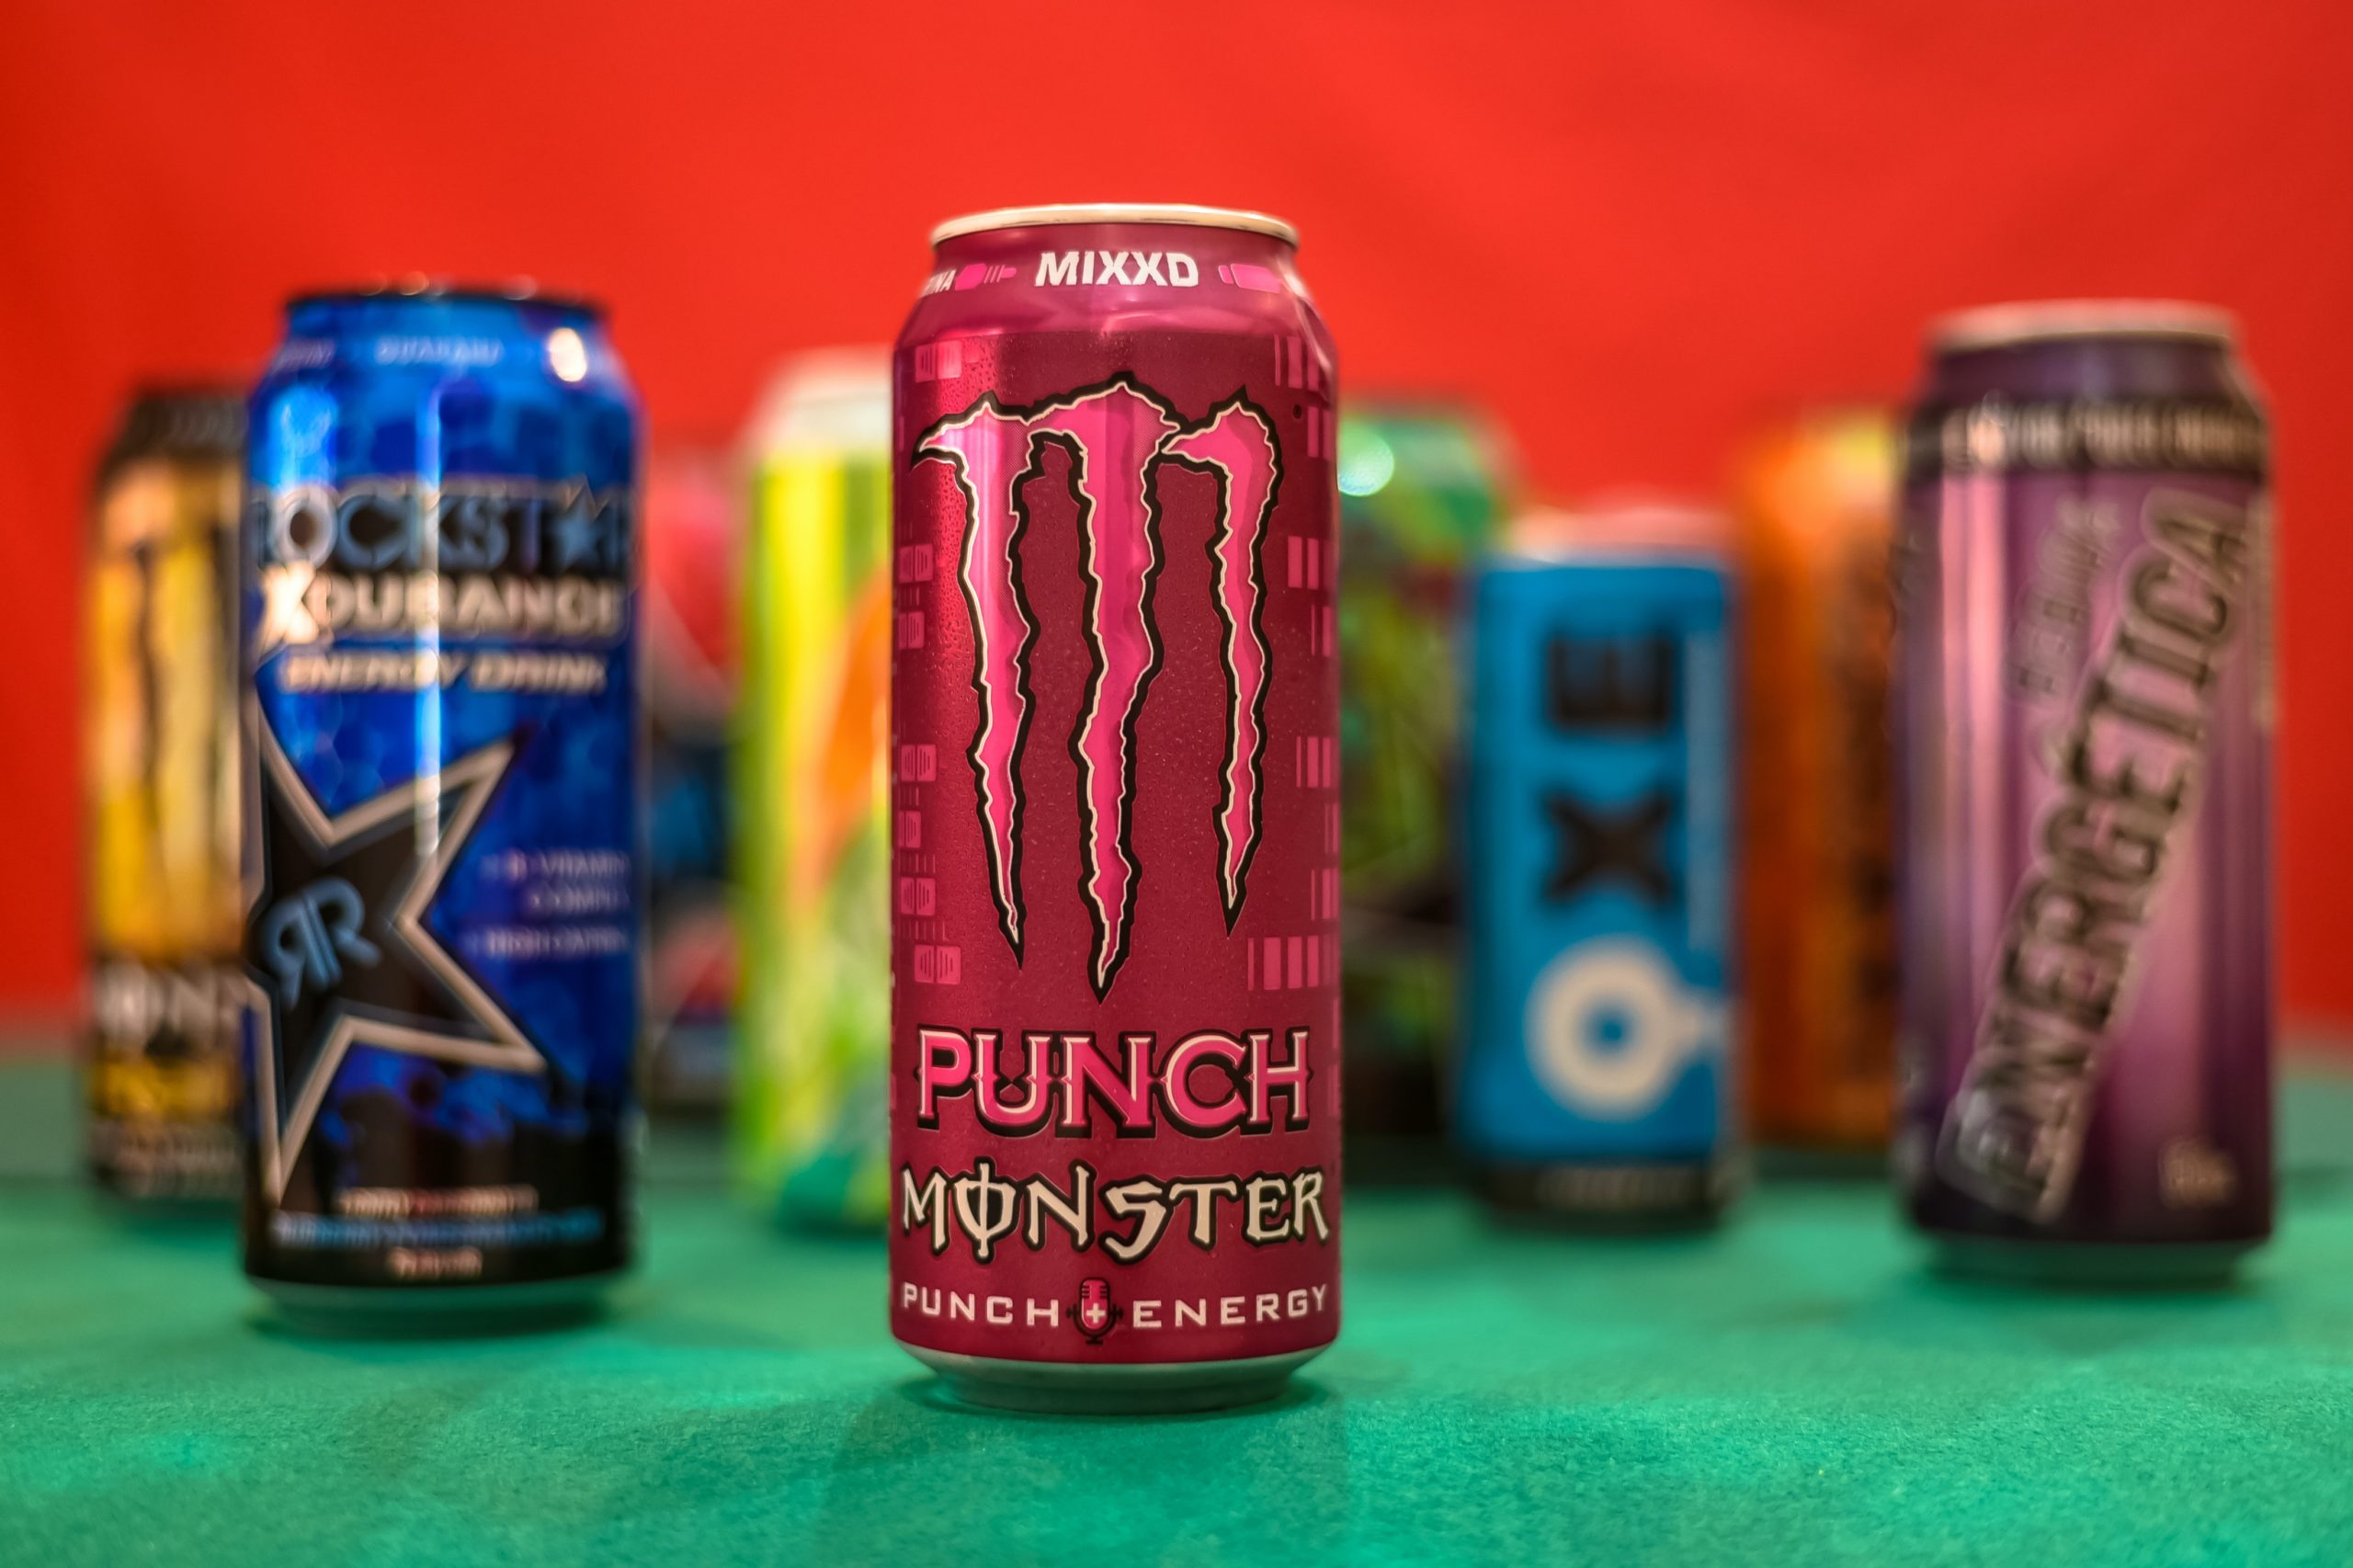 Different brands of energy drink with the Monster Punch energy drink at the center